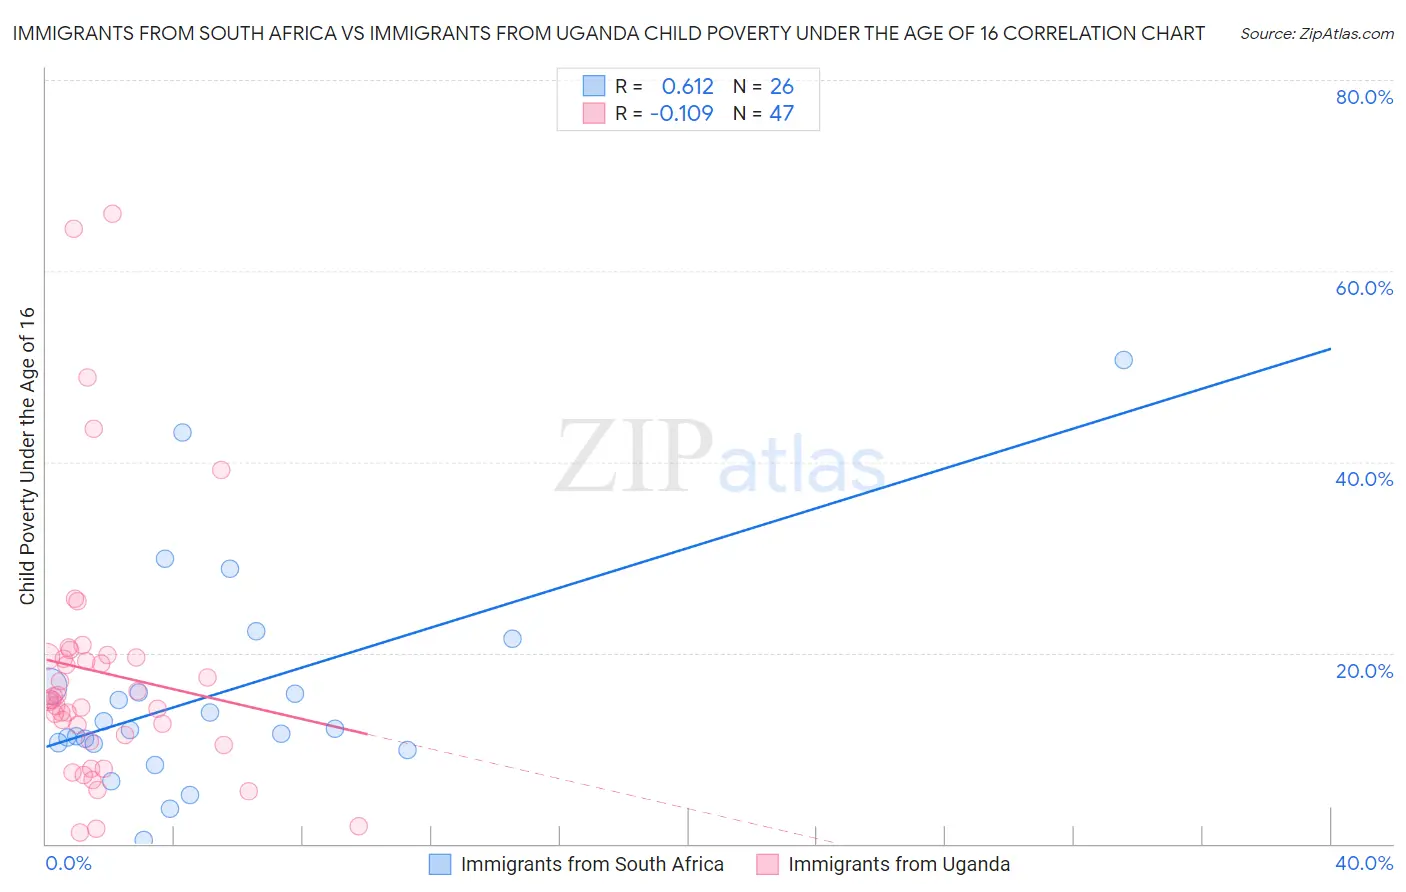 Immigrants from South Africa vs Immigrants from Uganda Child Poverty Under the Age of 16